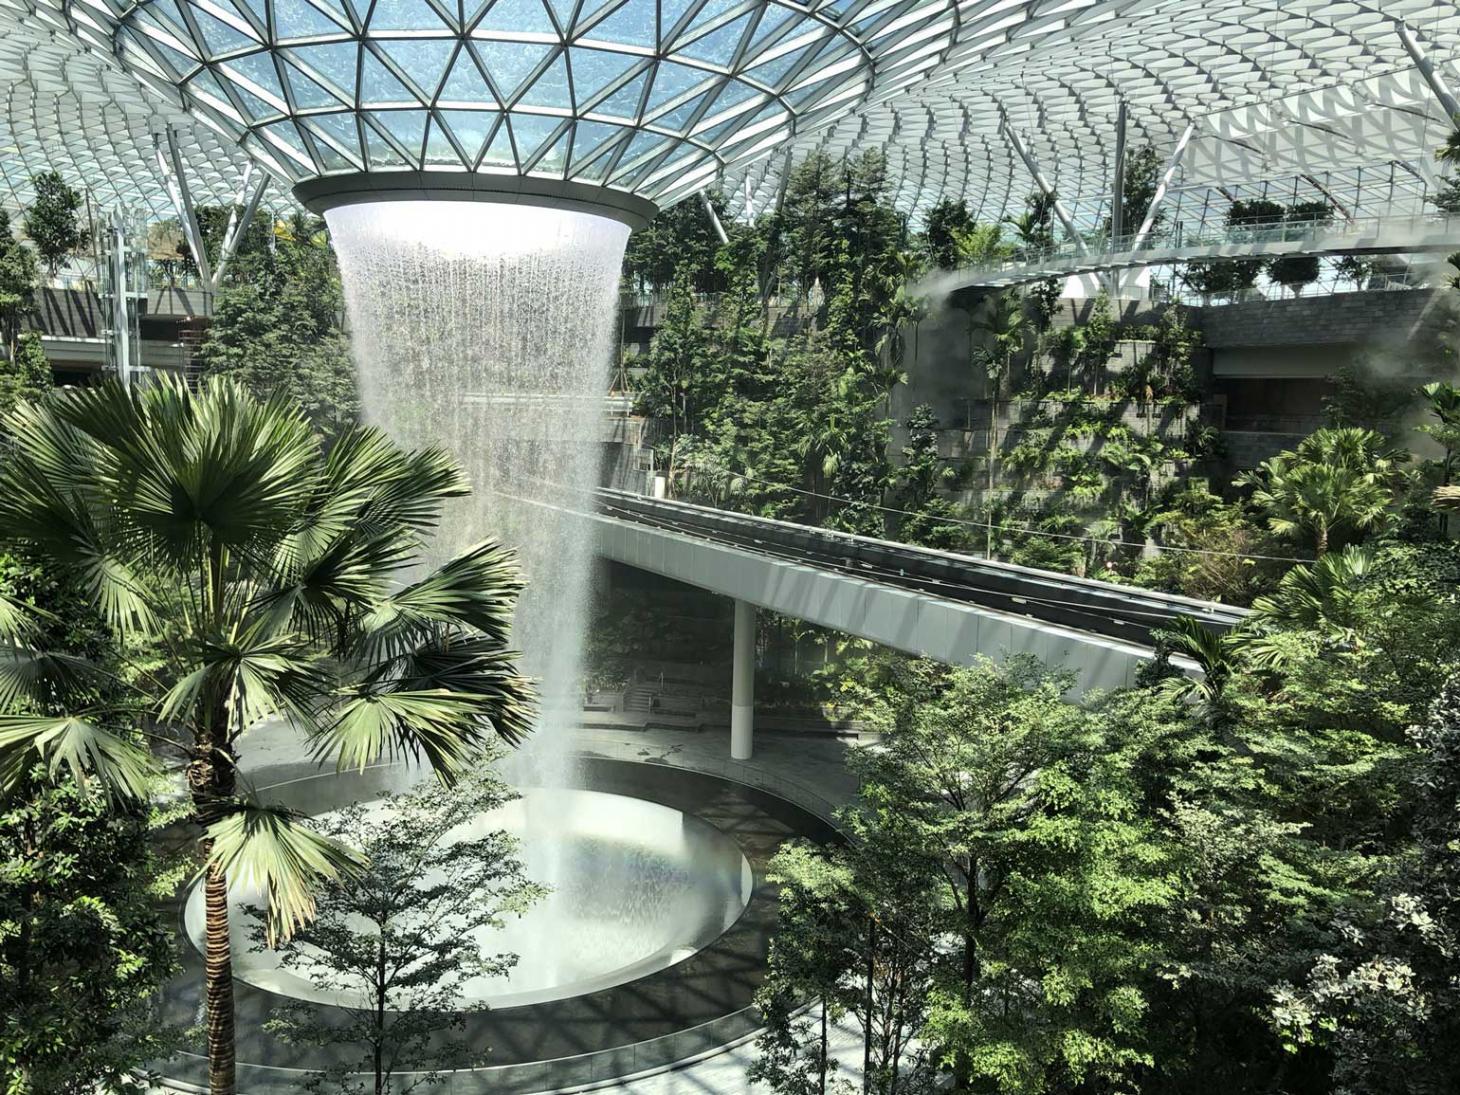 Jewel Changi by Safdie architects scheduled to open in 2019